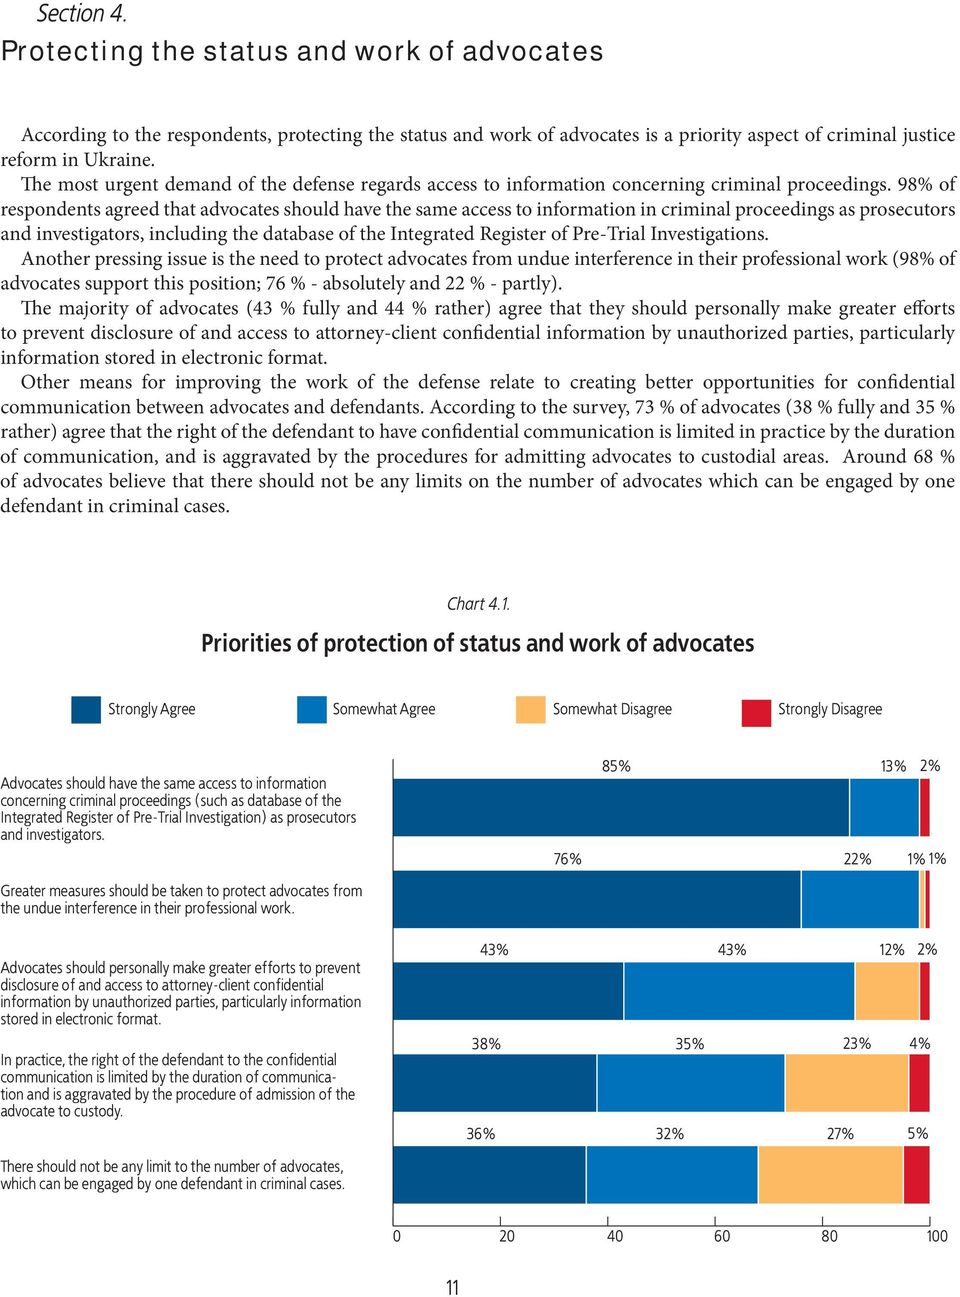 98% of respondents agreed that advocates should have the same access to information in criminal proceedings as prosecutors and investigators, including the database of the Integrated Register of